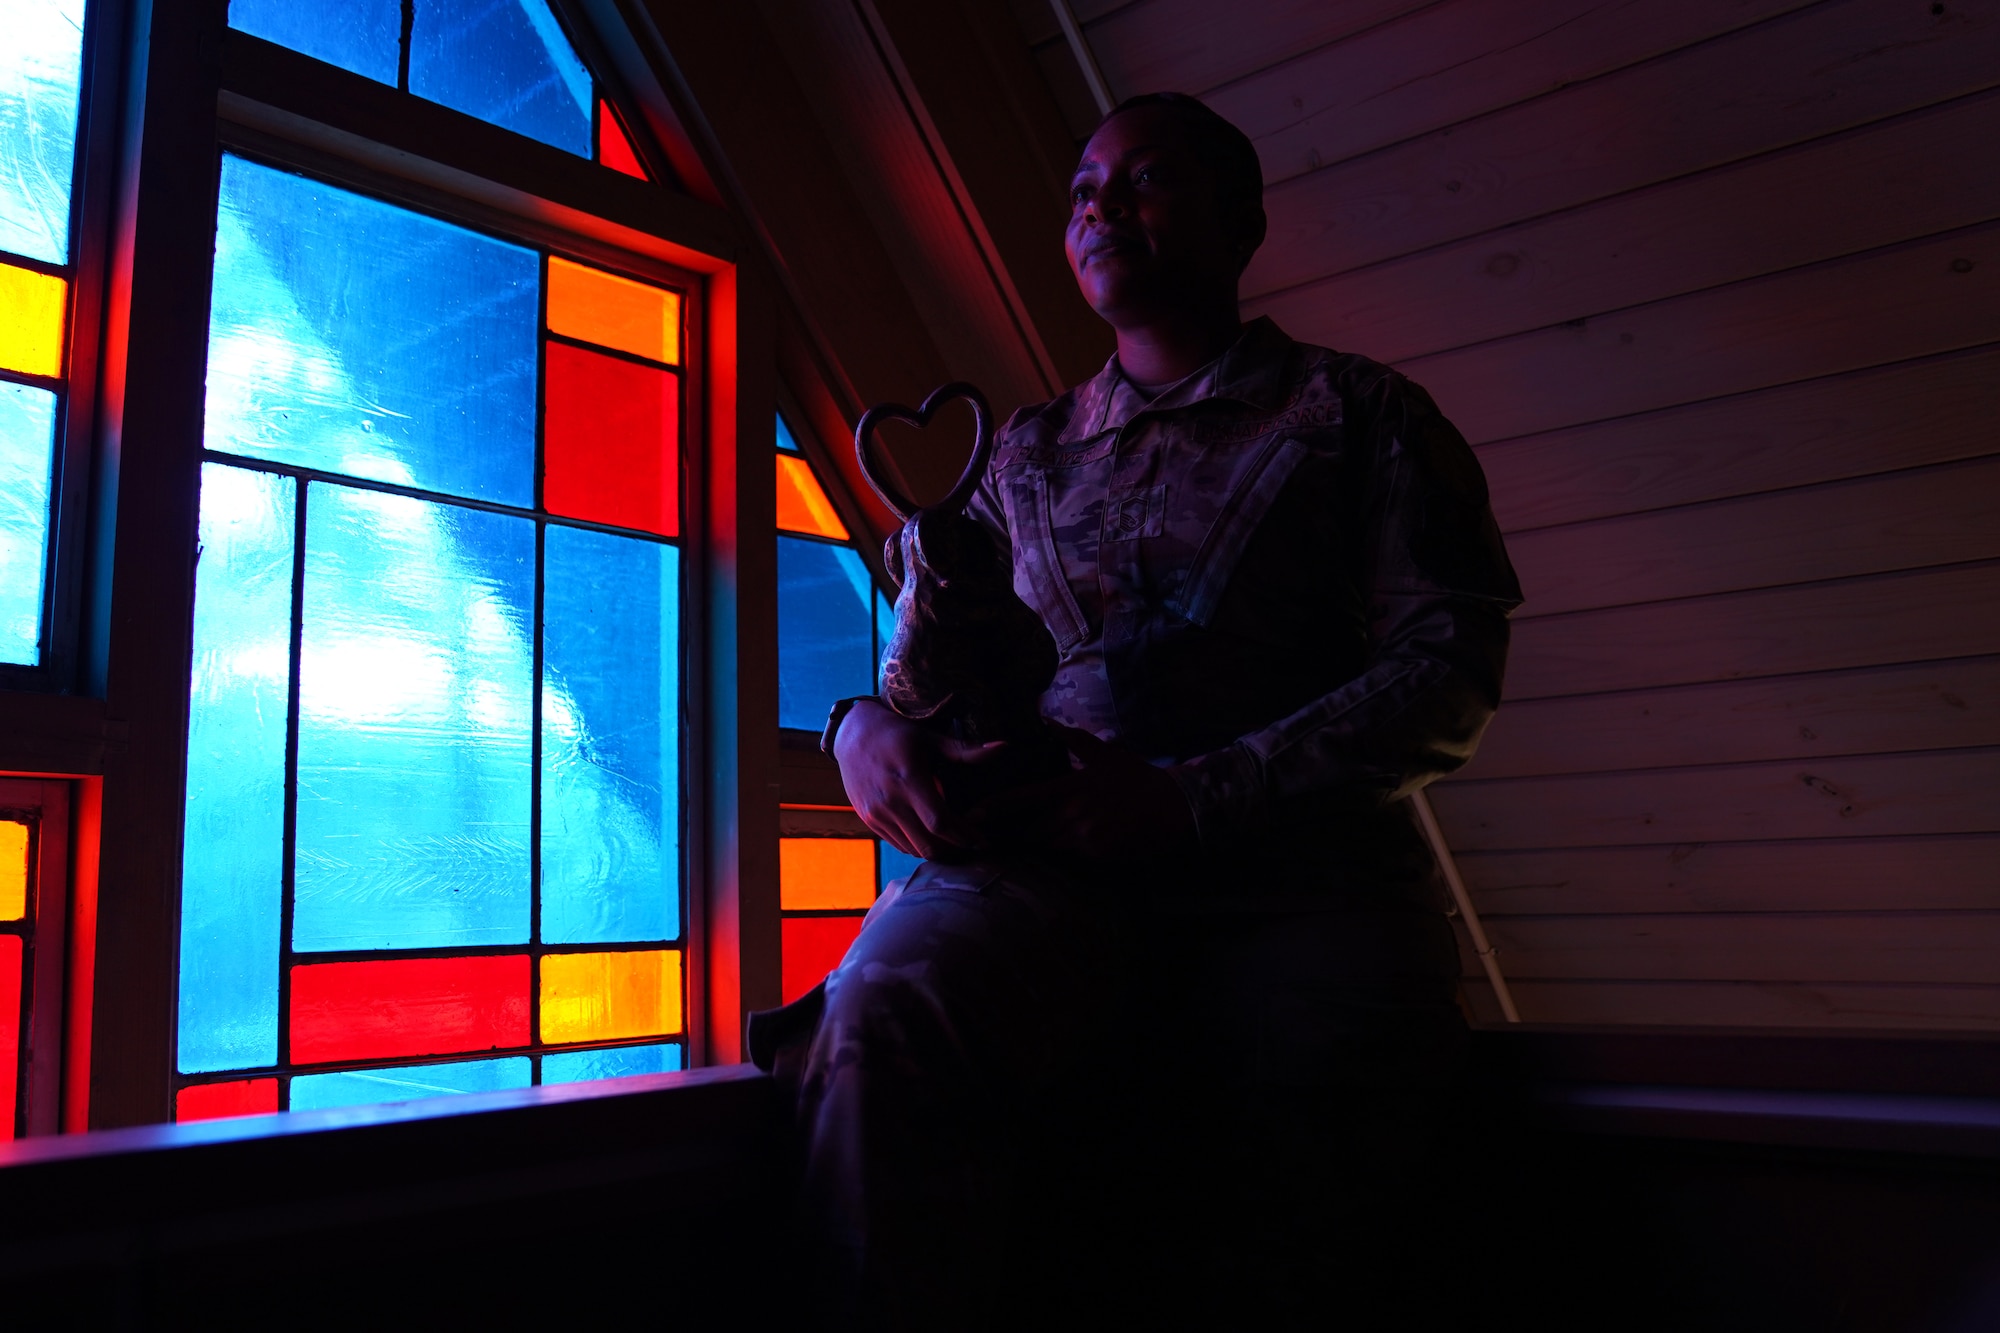 U.S. Air Force Senior Master Sgt. Jessica Player, Mathies NCO Academy director of education, poses inside the Larcher Chapel at Keesler Air Force Base Dec. 10, 2020. As a practicing Muslim, Player follows her faith to help strengthen her purpose. (U.S. Air Force photo by Airman 1st Class Seth Haddix)